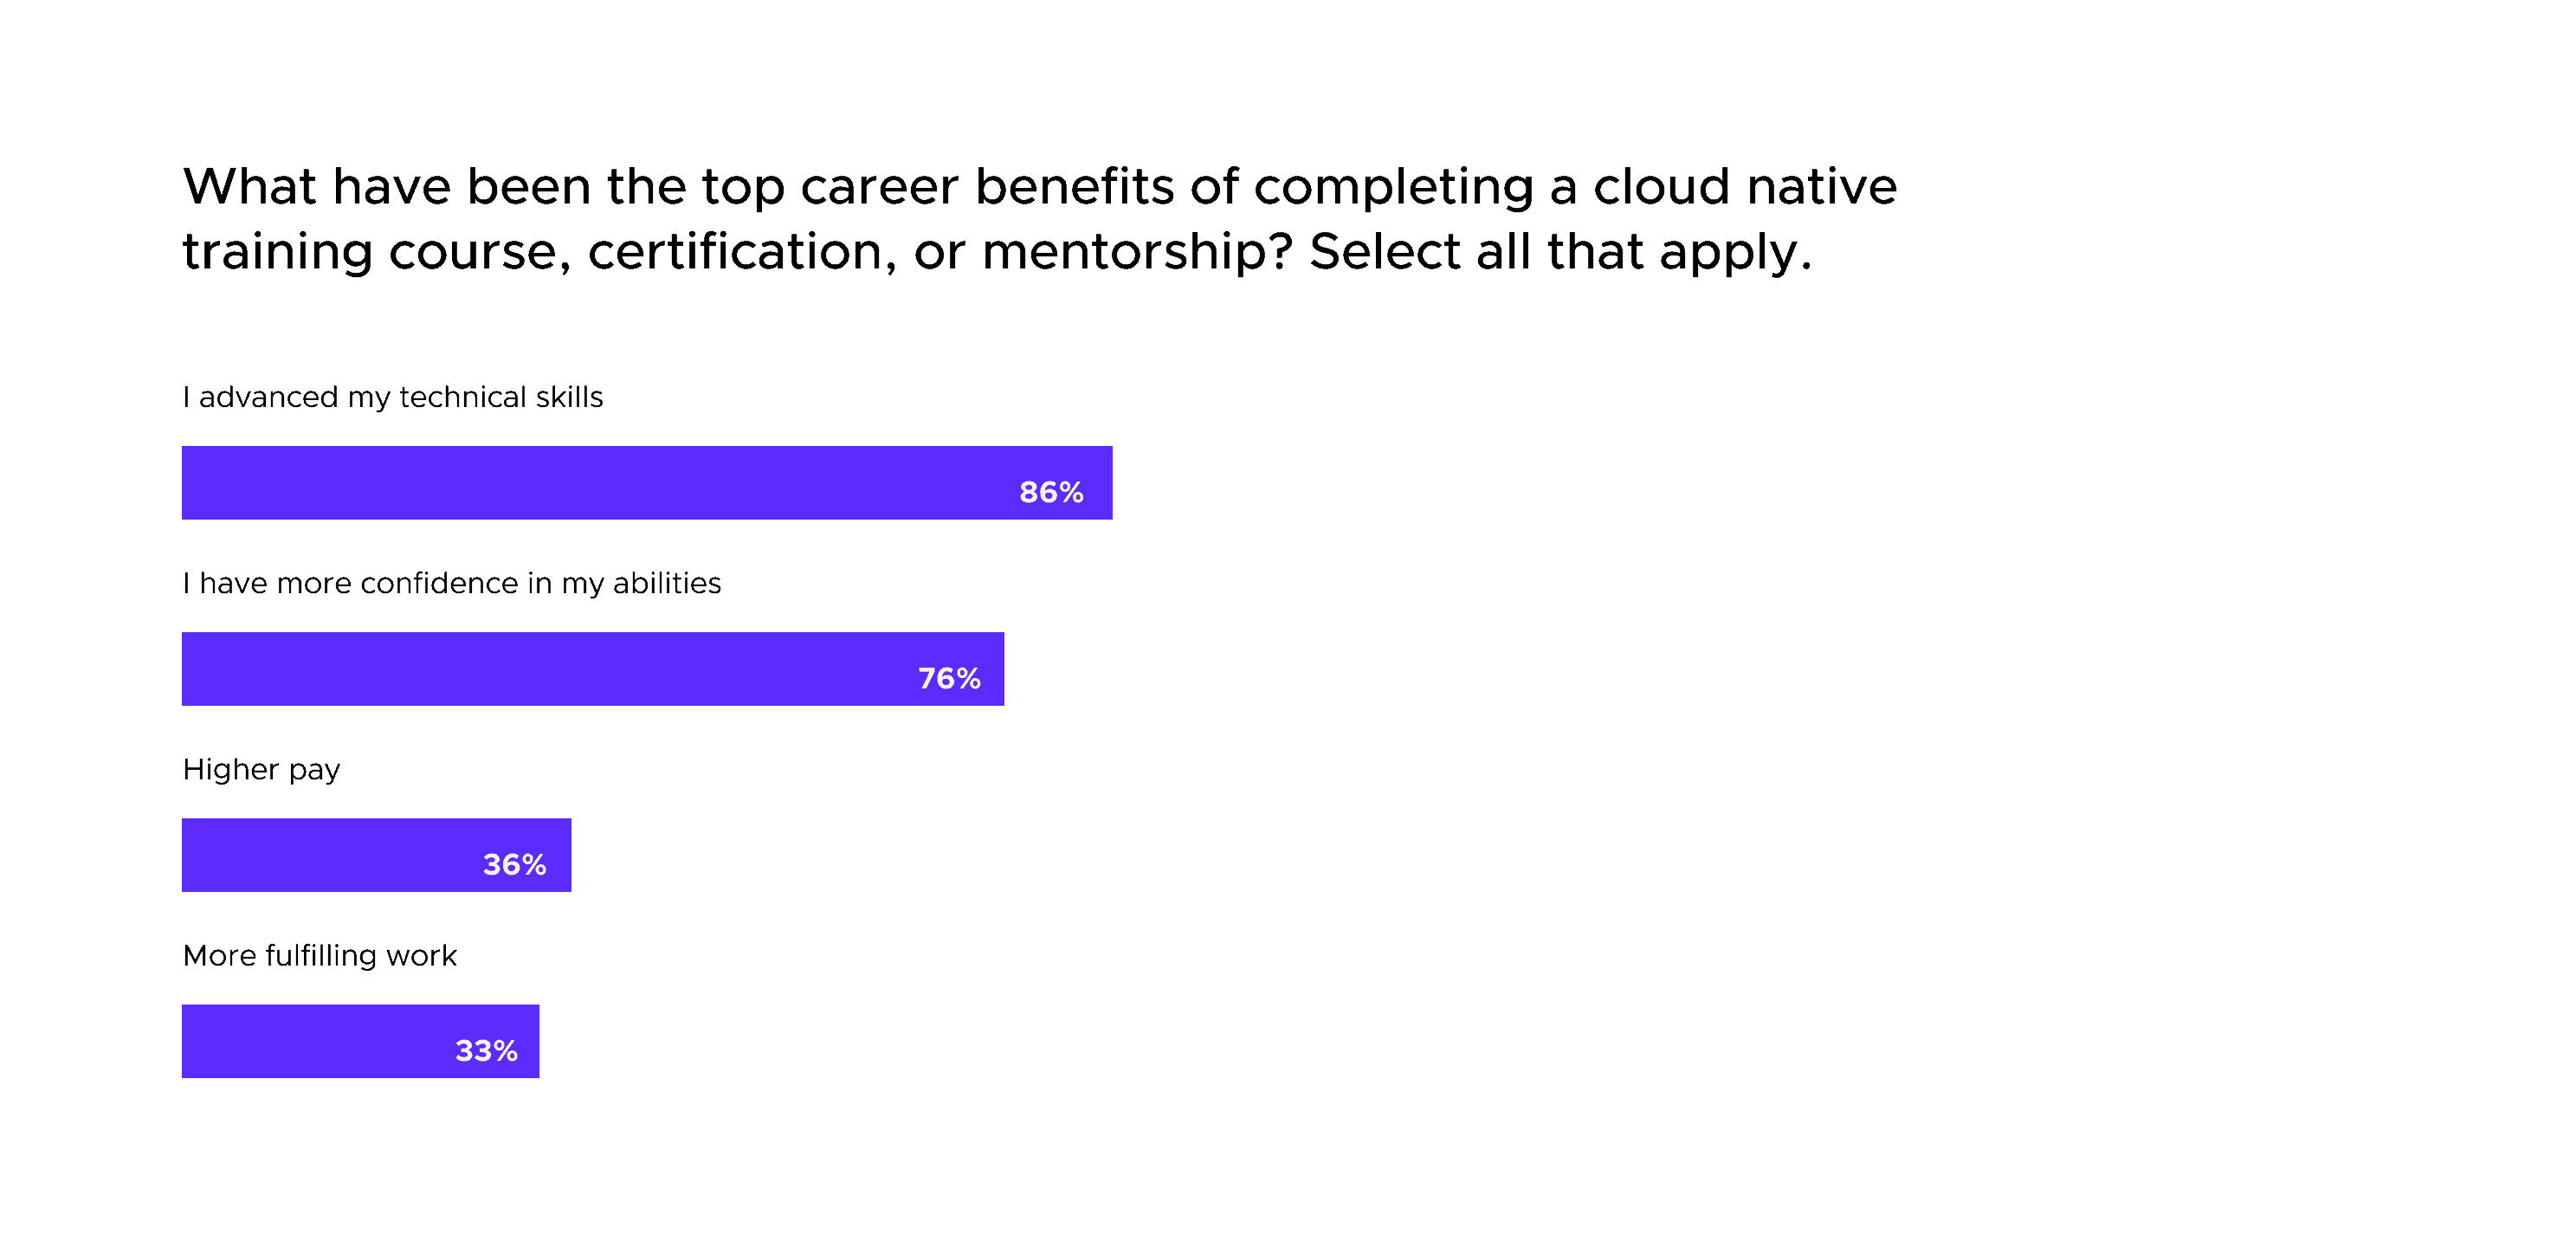 Bar chart showing the respondent's responds on benefits of completing a cloud native training course, certification or mentorship. 86% responded that they have advanced their technical skills